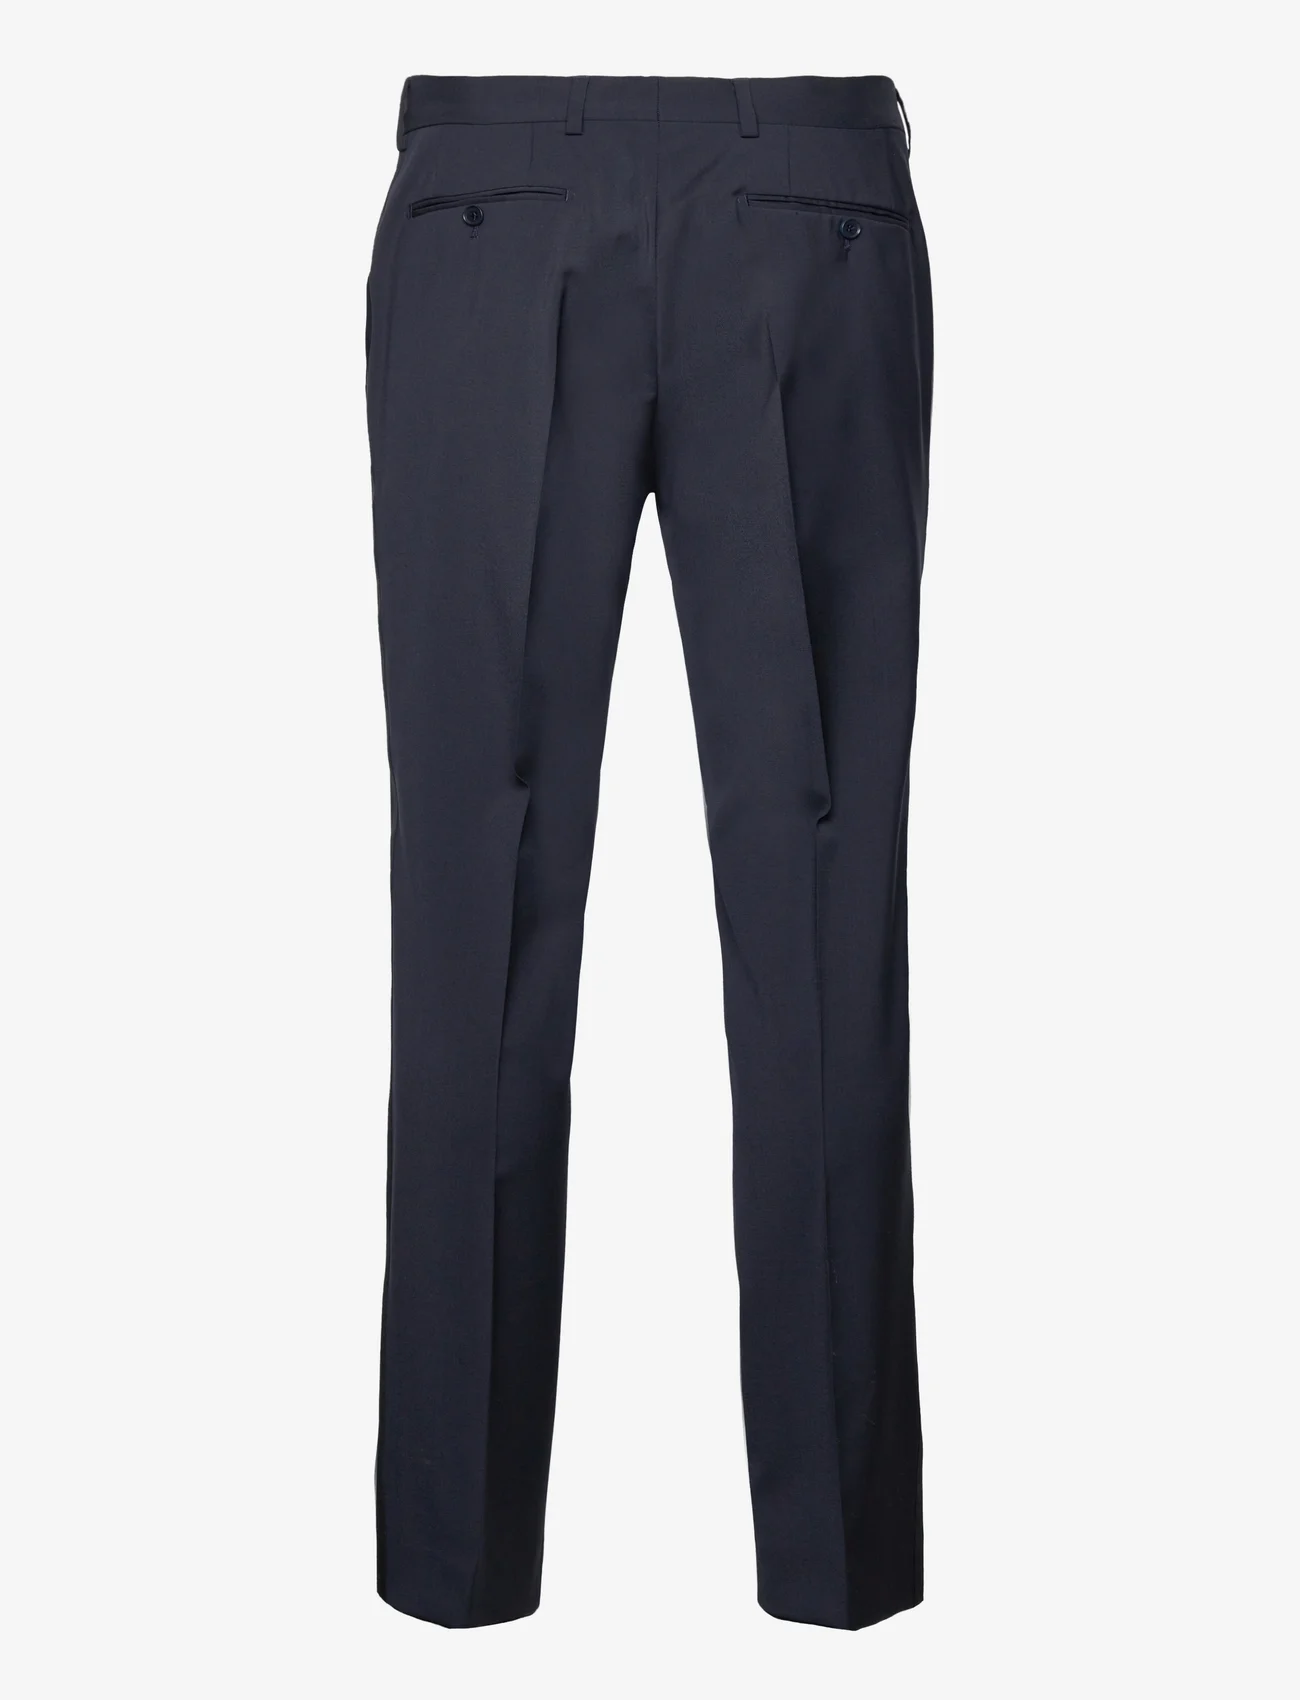 SIR of Sweden - Sven Tux Trousers - nordic style - navy - 1